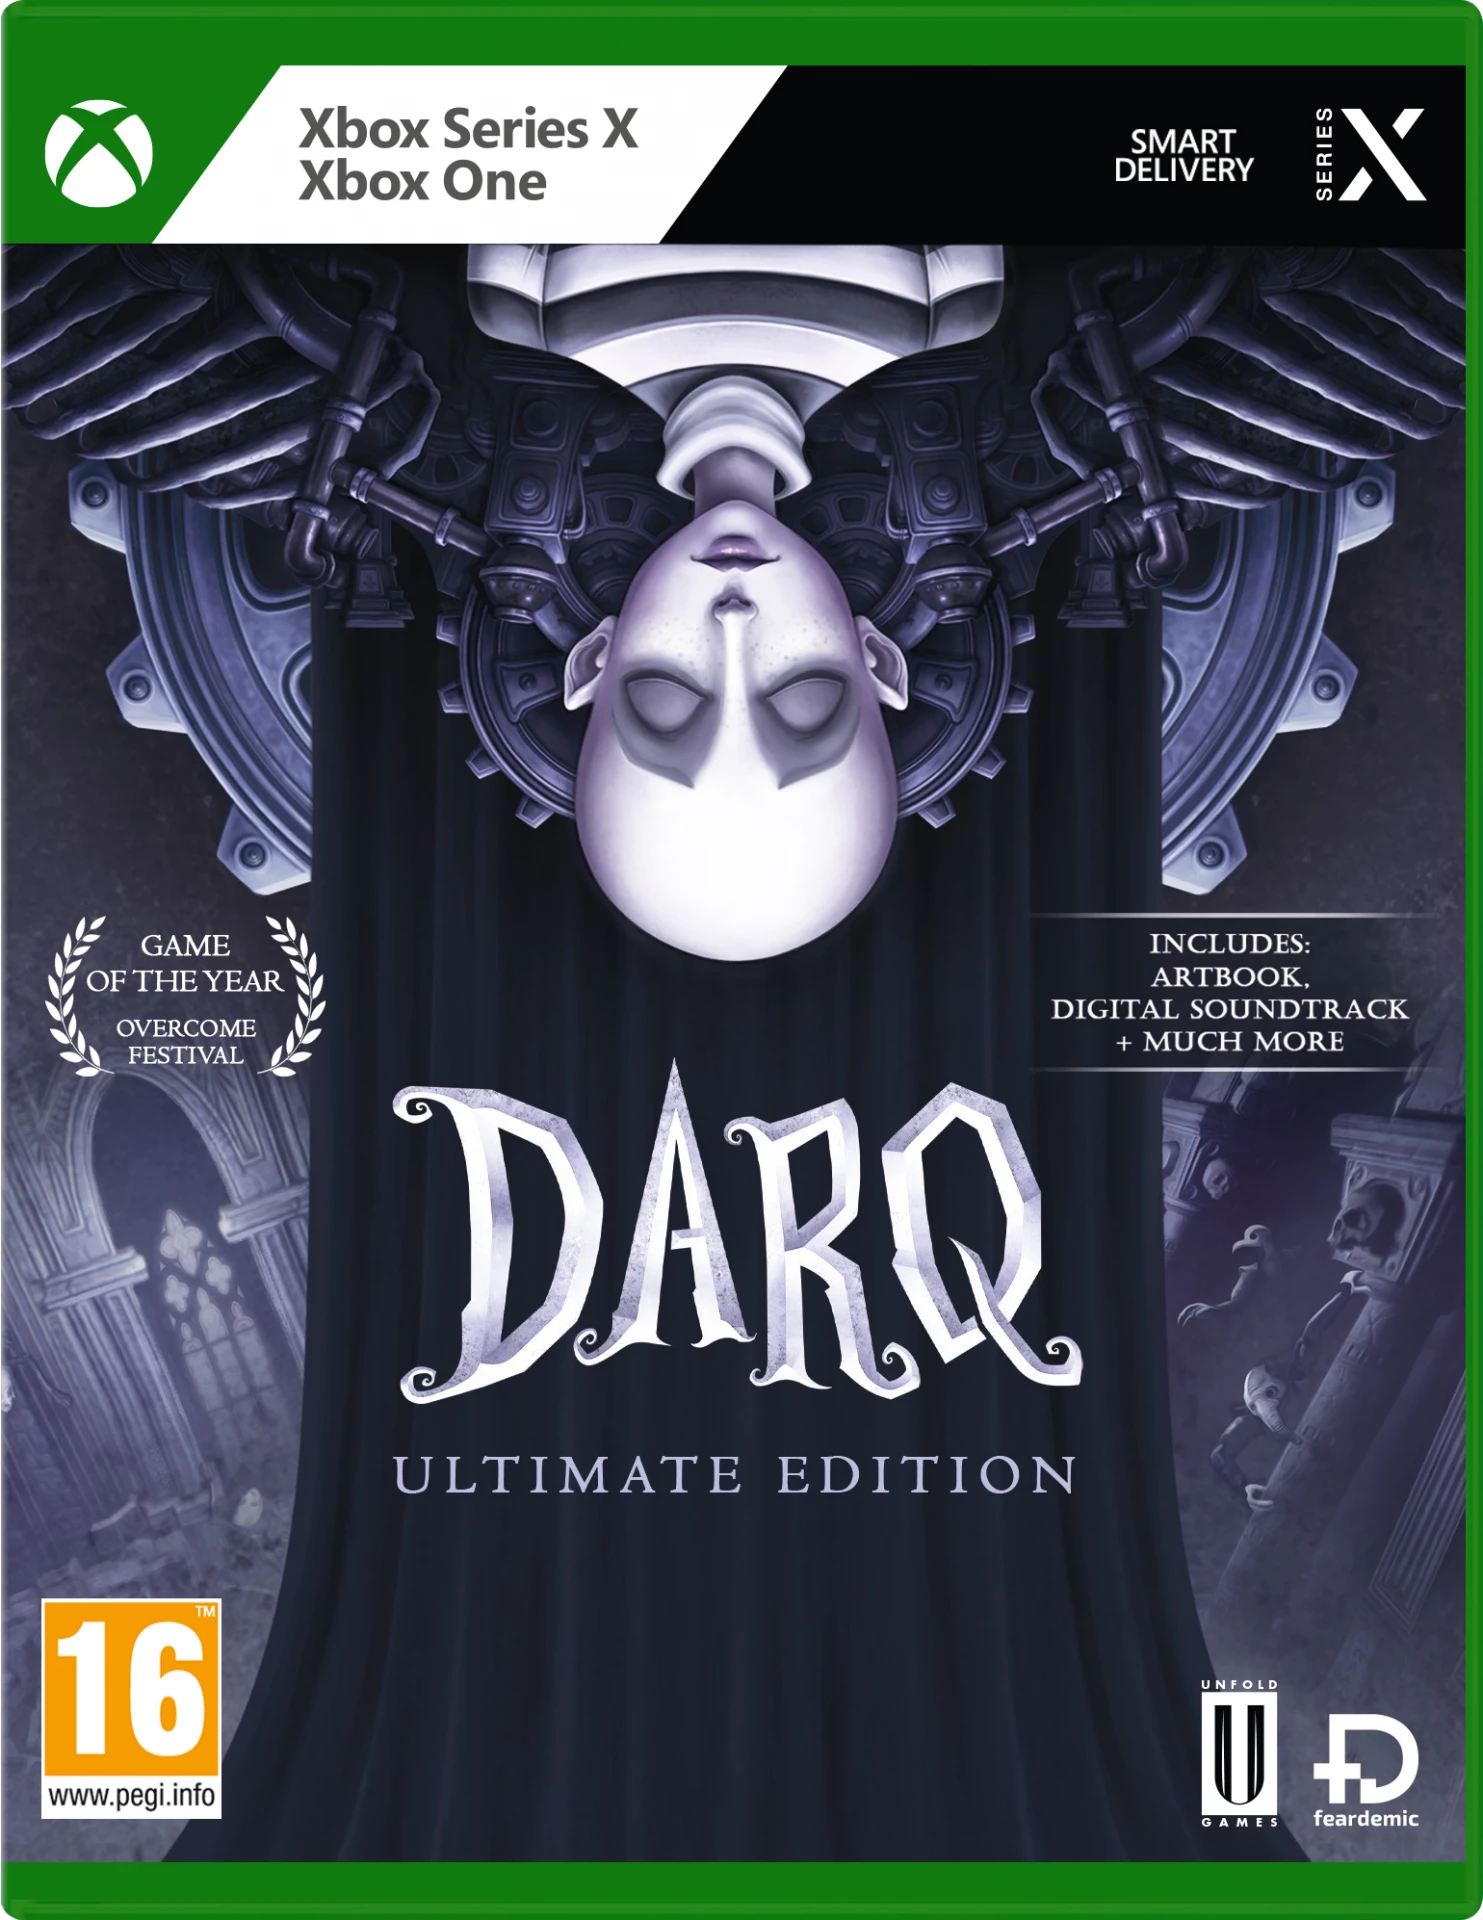 DARQ - Ultimate Edition (Xbox One), Unfold Games, Feardemic